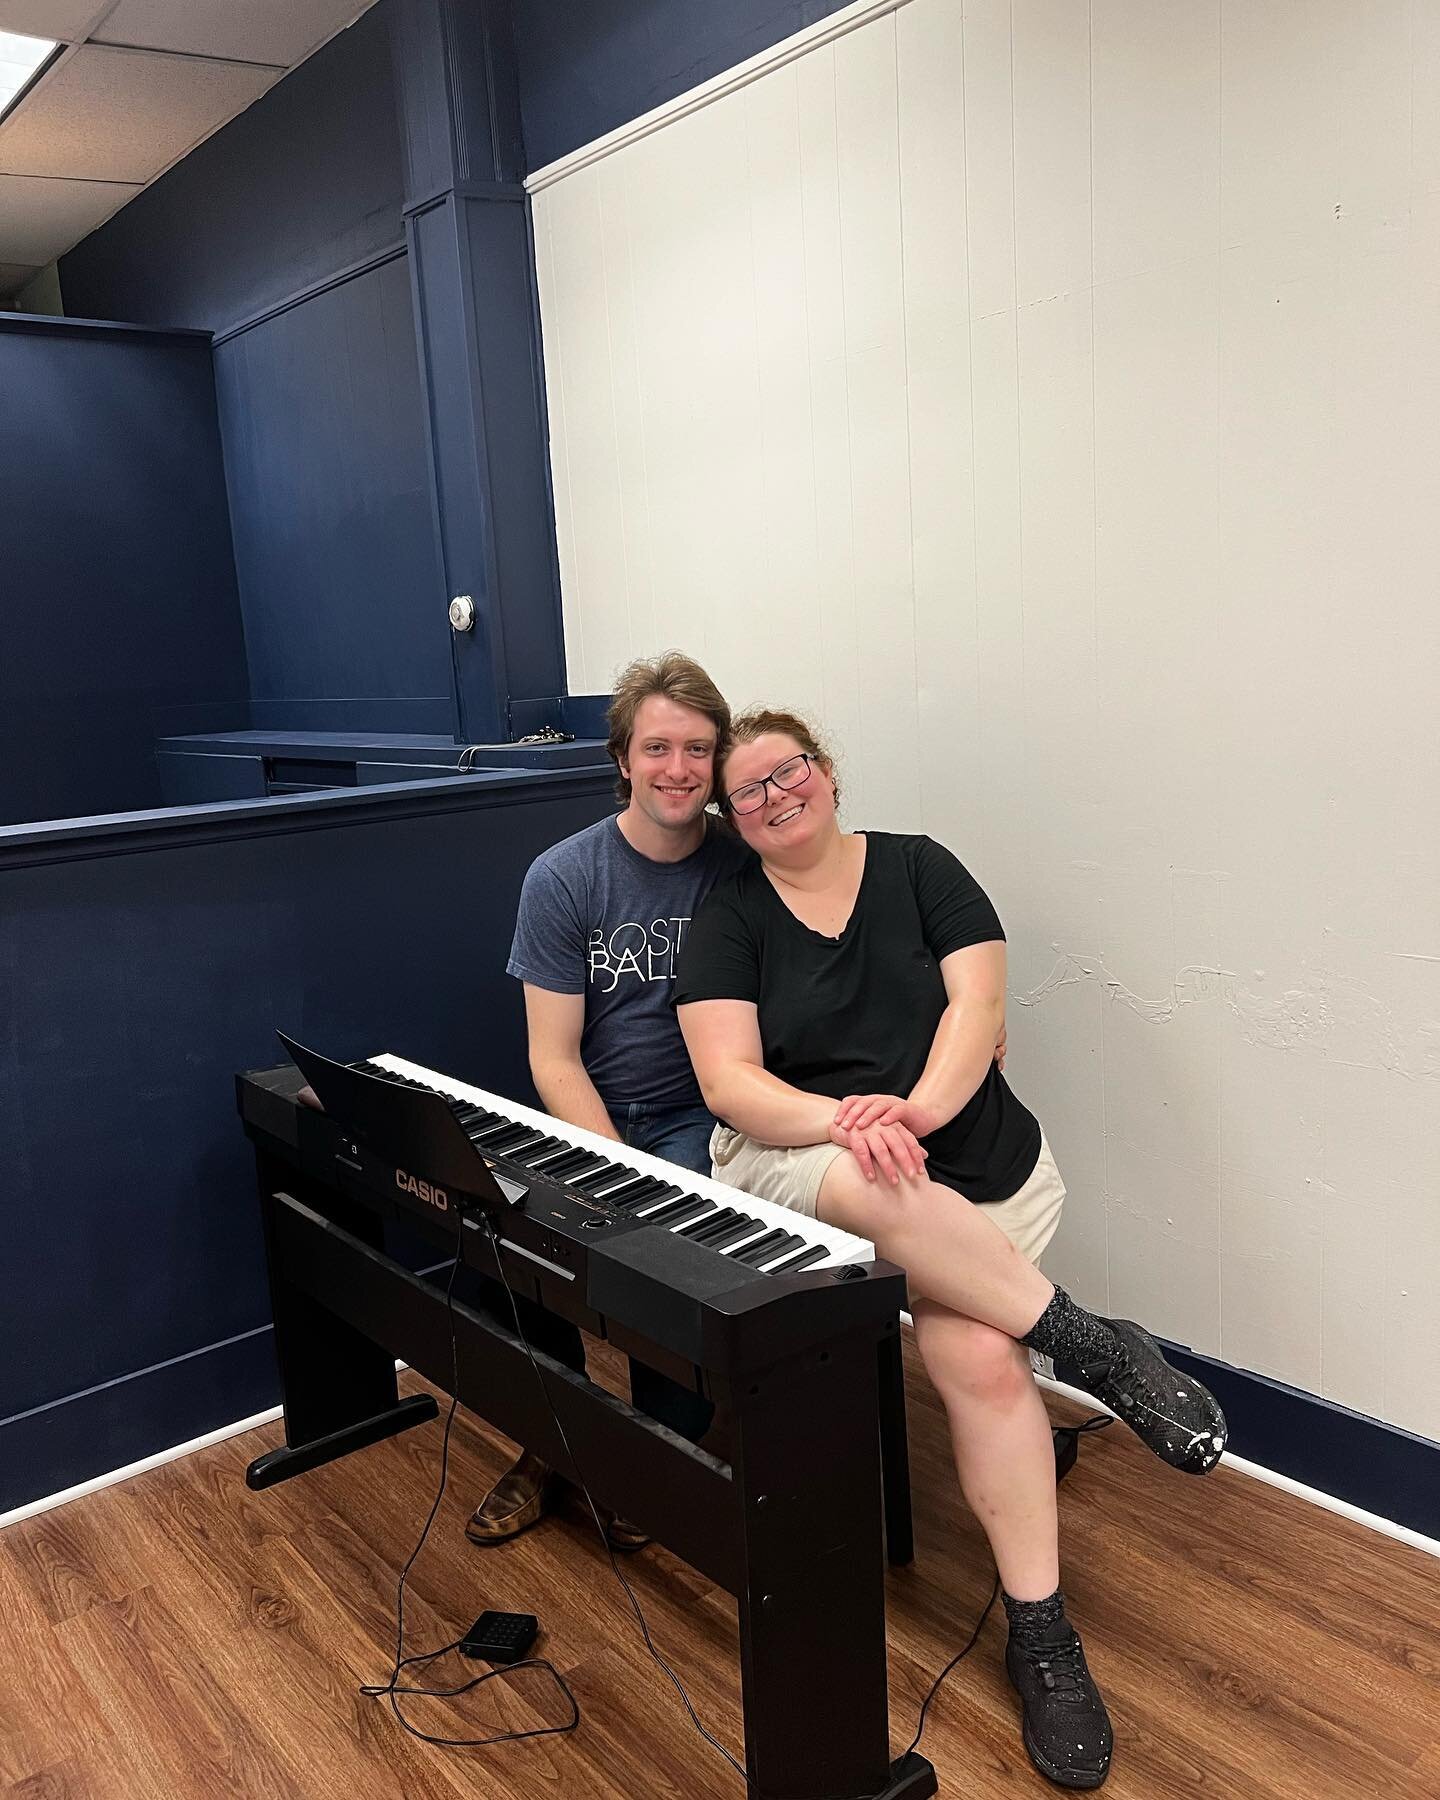 With the new floors, many hours of tearing down wallpaper, fresh paint, and repairing the walls our new space is really starting to shine! We cannot wait for our baby grand to come in next week. Thank you to our family and friends who have helped wit